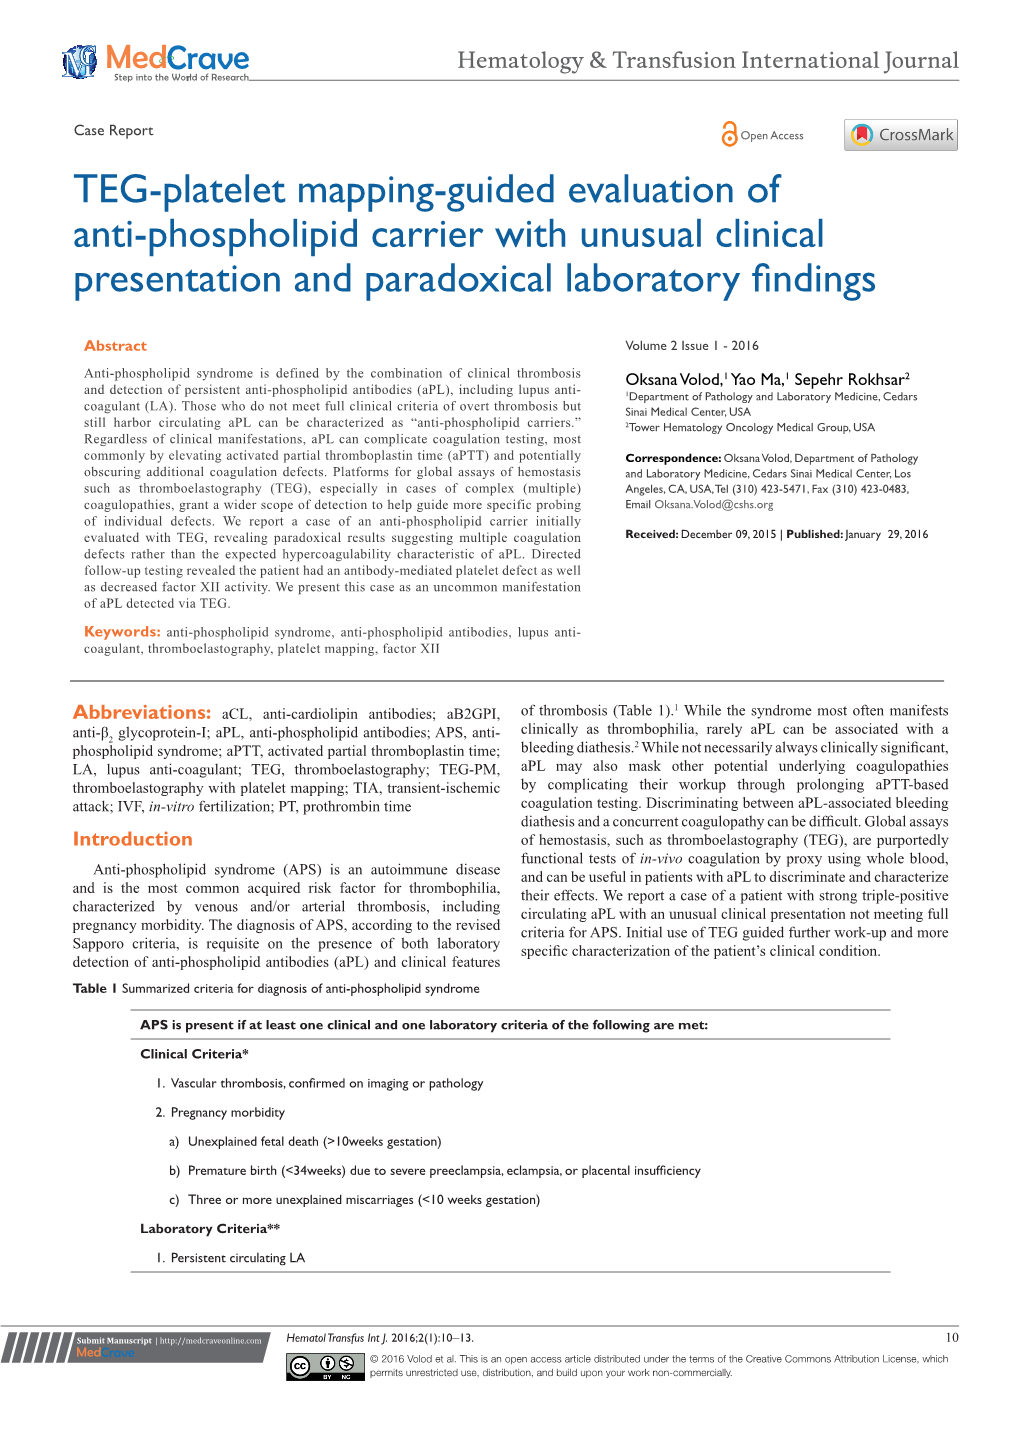 TEG-Platelet Mapping-Guided Evaluation of Anti-Phospholipid Carrier with Unusual Clinical Presentation and Paradoxical Laboratory Findings